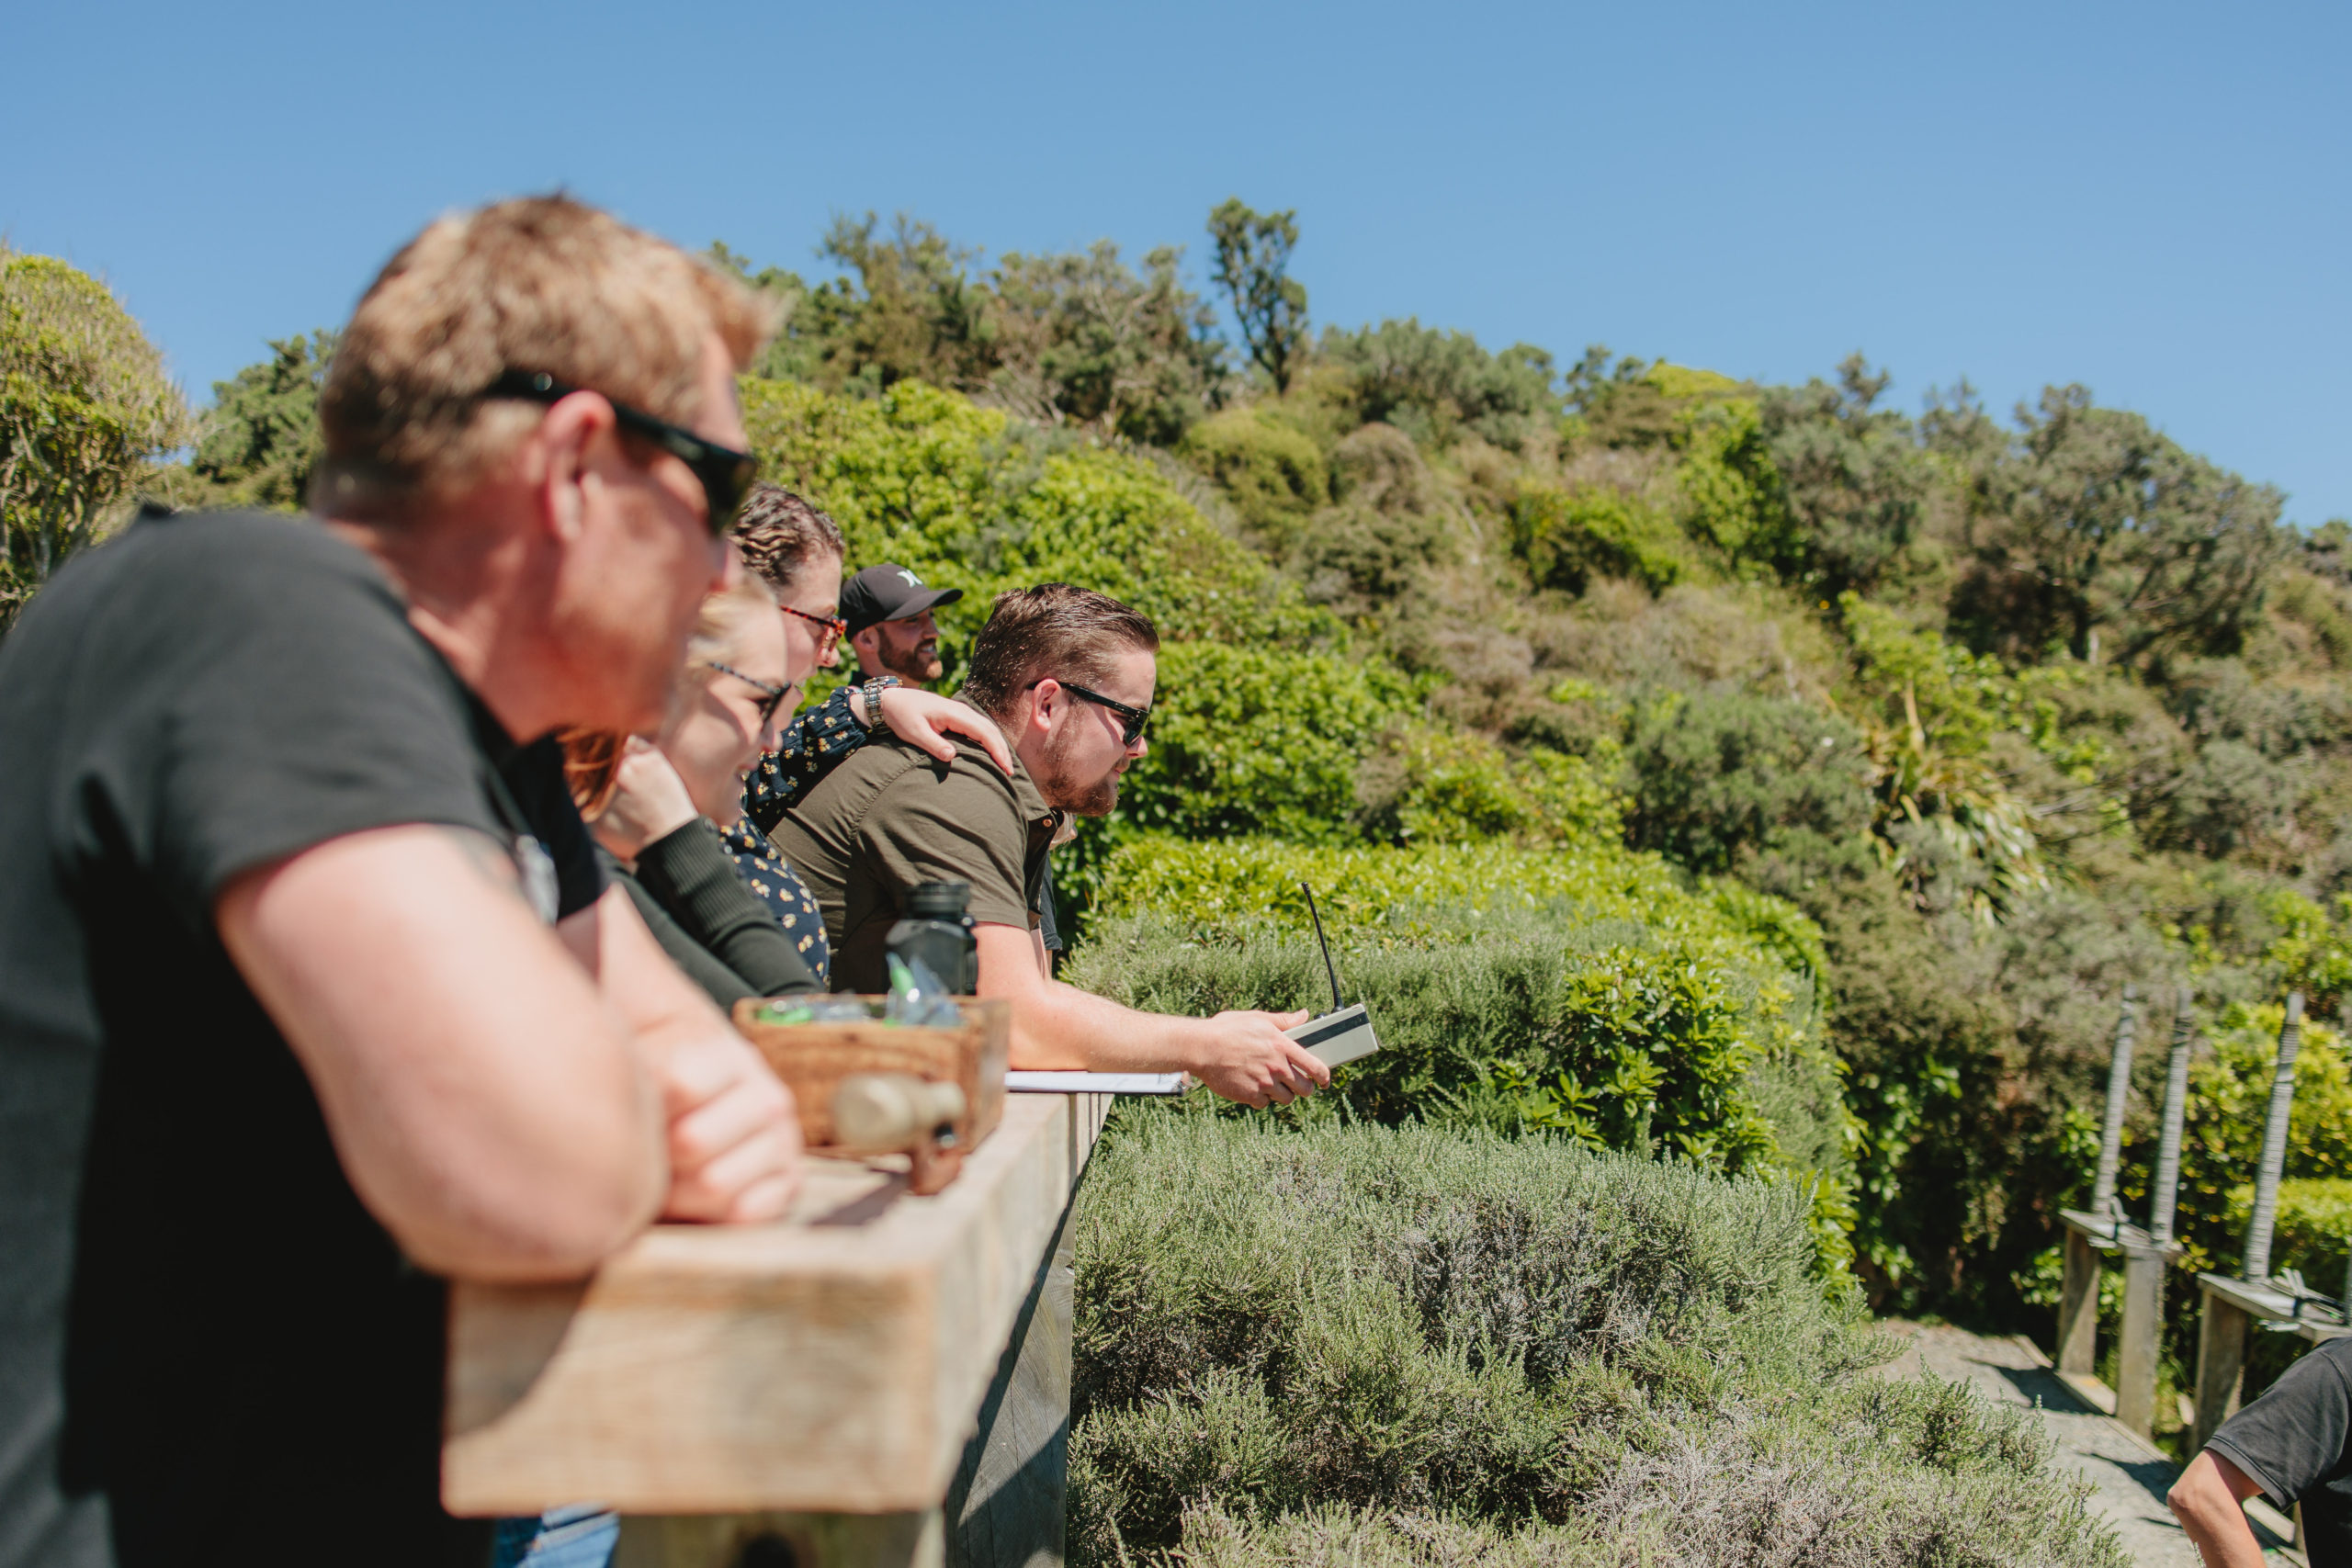 Guests score clay bird shooting from the perfect spectators position